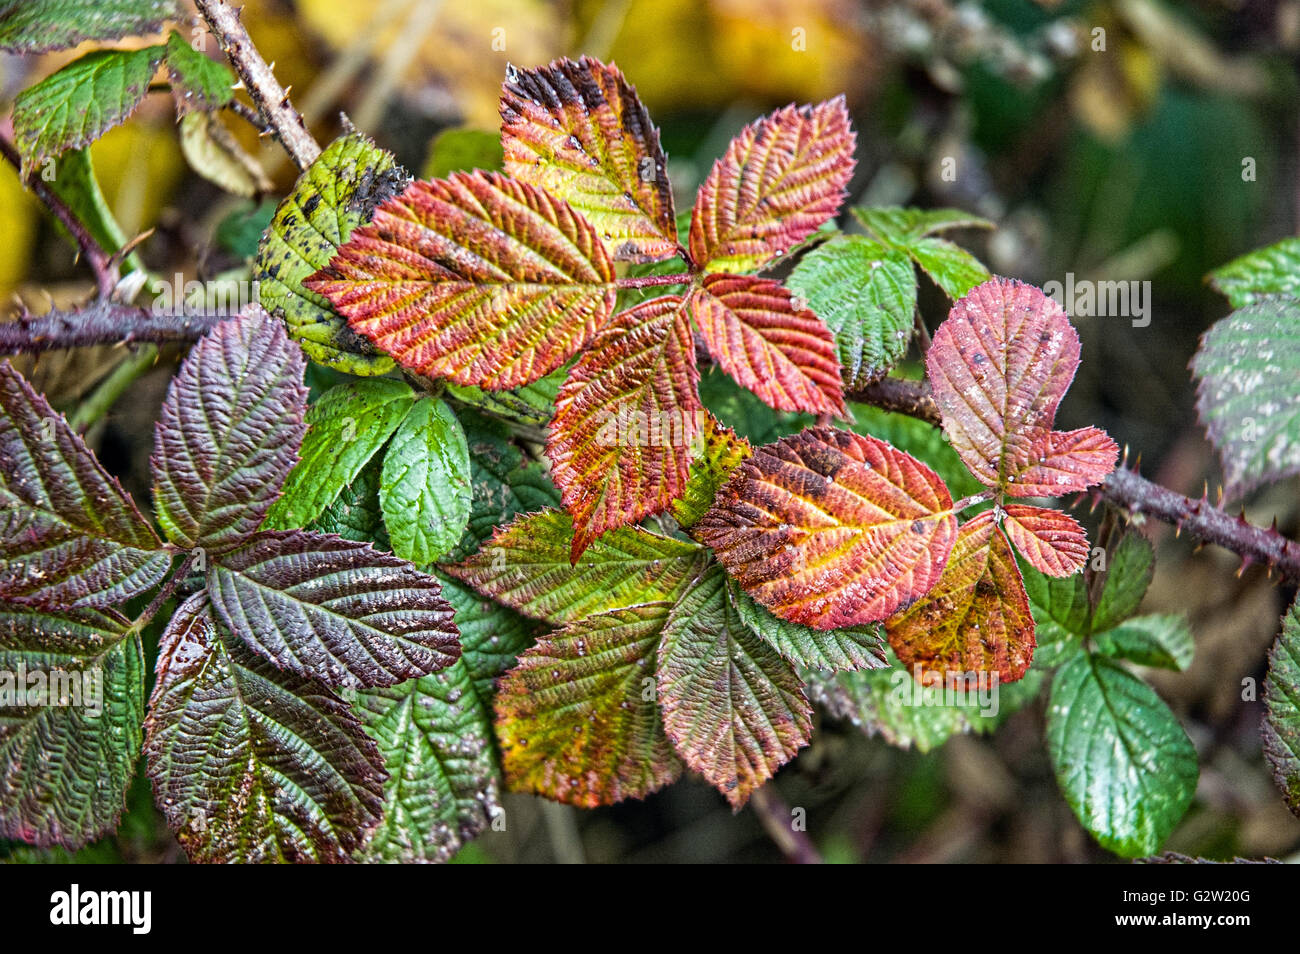 Bramble or Blackberry (Rubus fruticosus) leaves in autumn showing beautiful colors Stock Photo